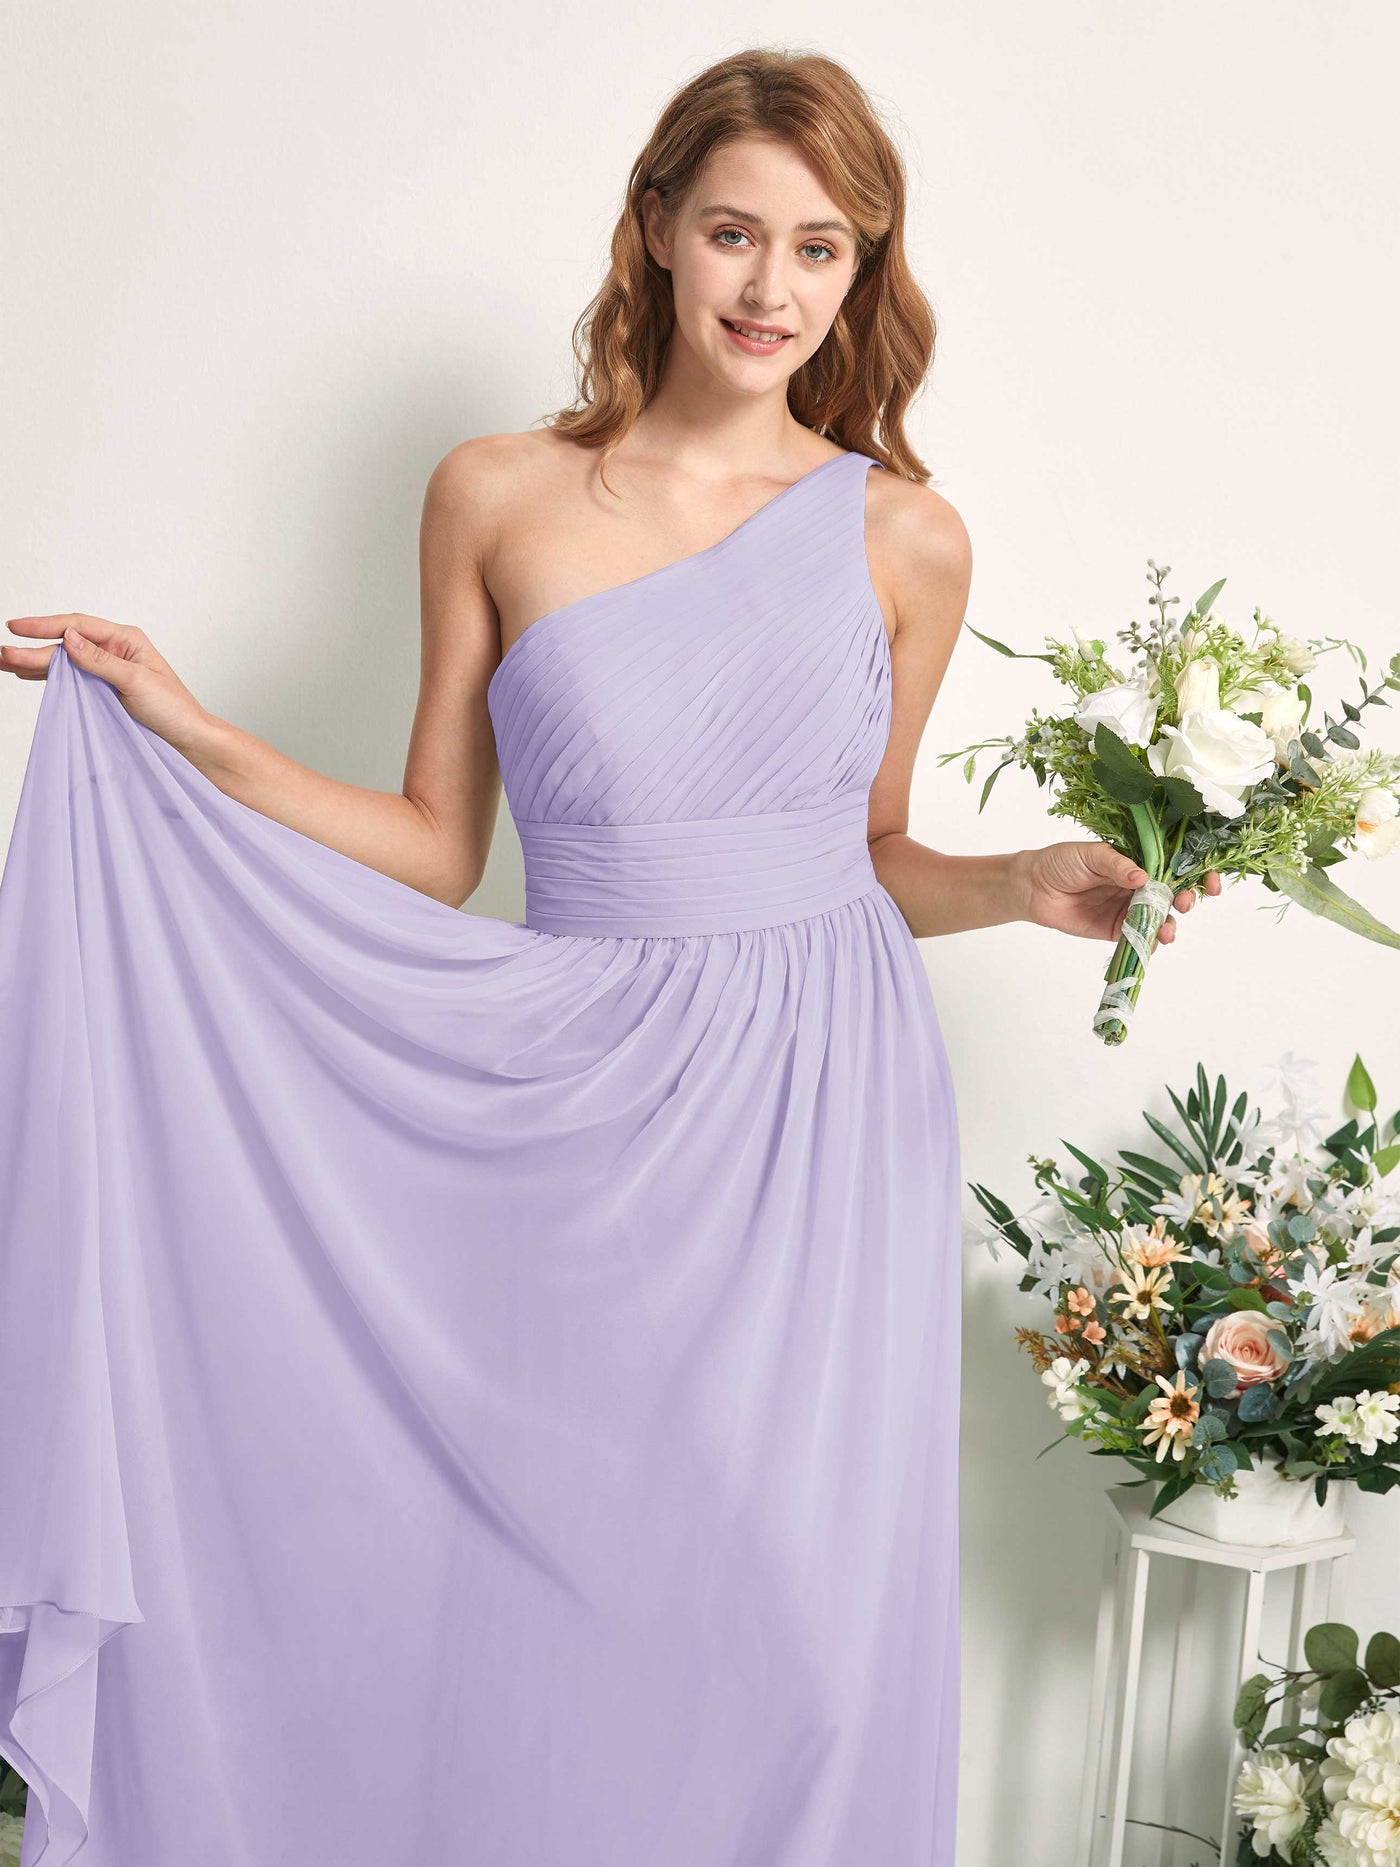 Bridesmaid Dress A-line Chiffon One Shoulder Full Length Sleeveless Wedding Party Dress - Lilac (81226714)#color_lilac